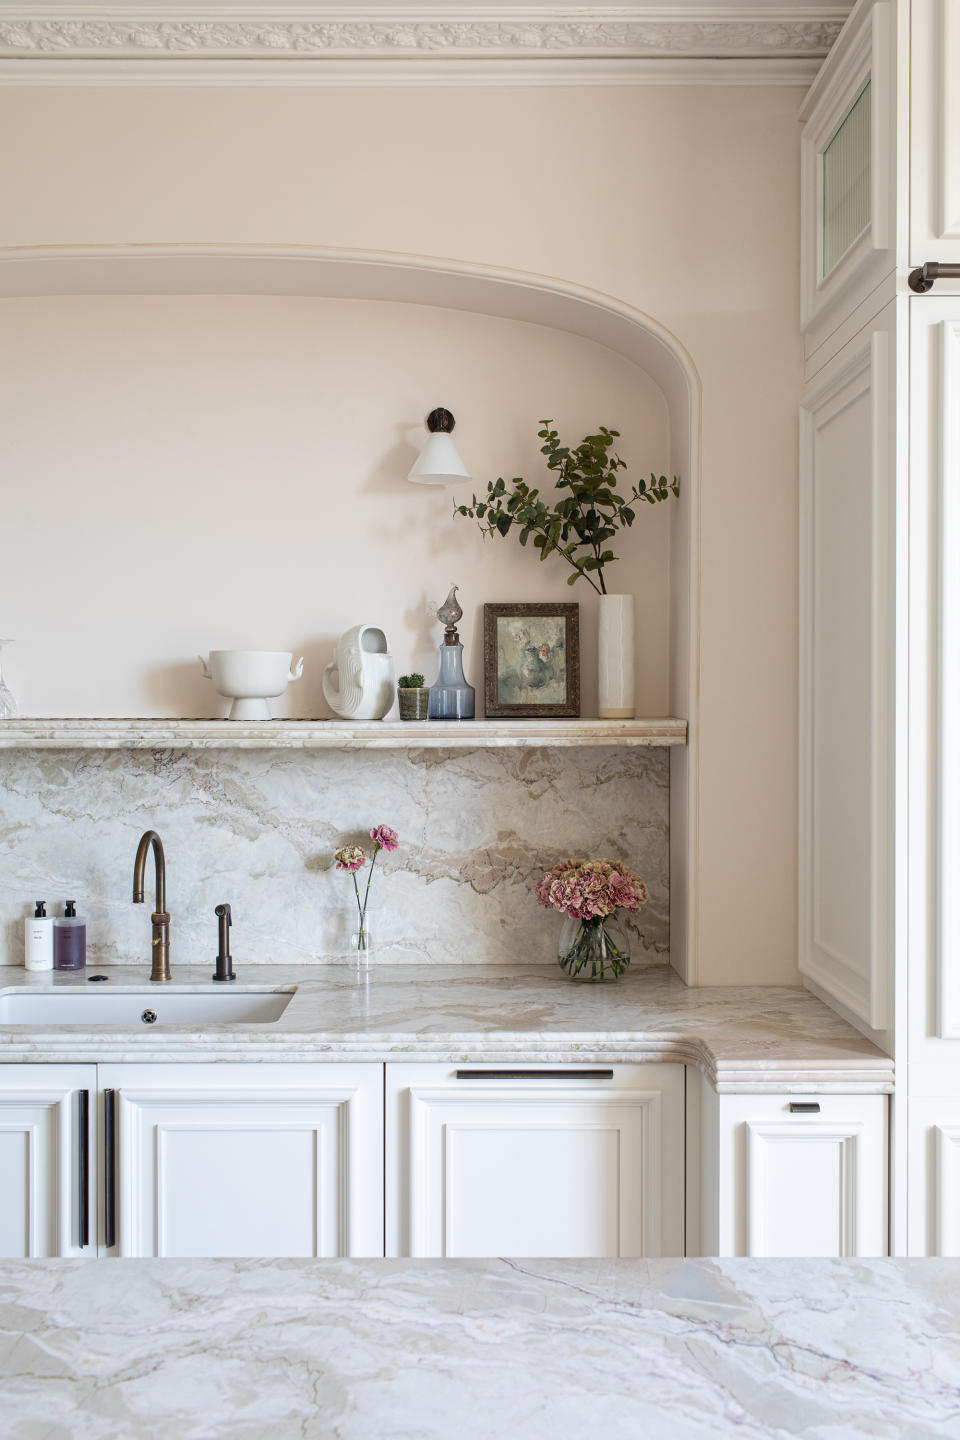 5. Pair off-white with marble for an elegant neutral kitchen